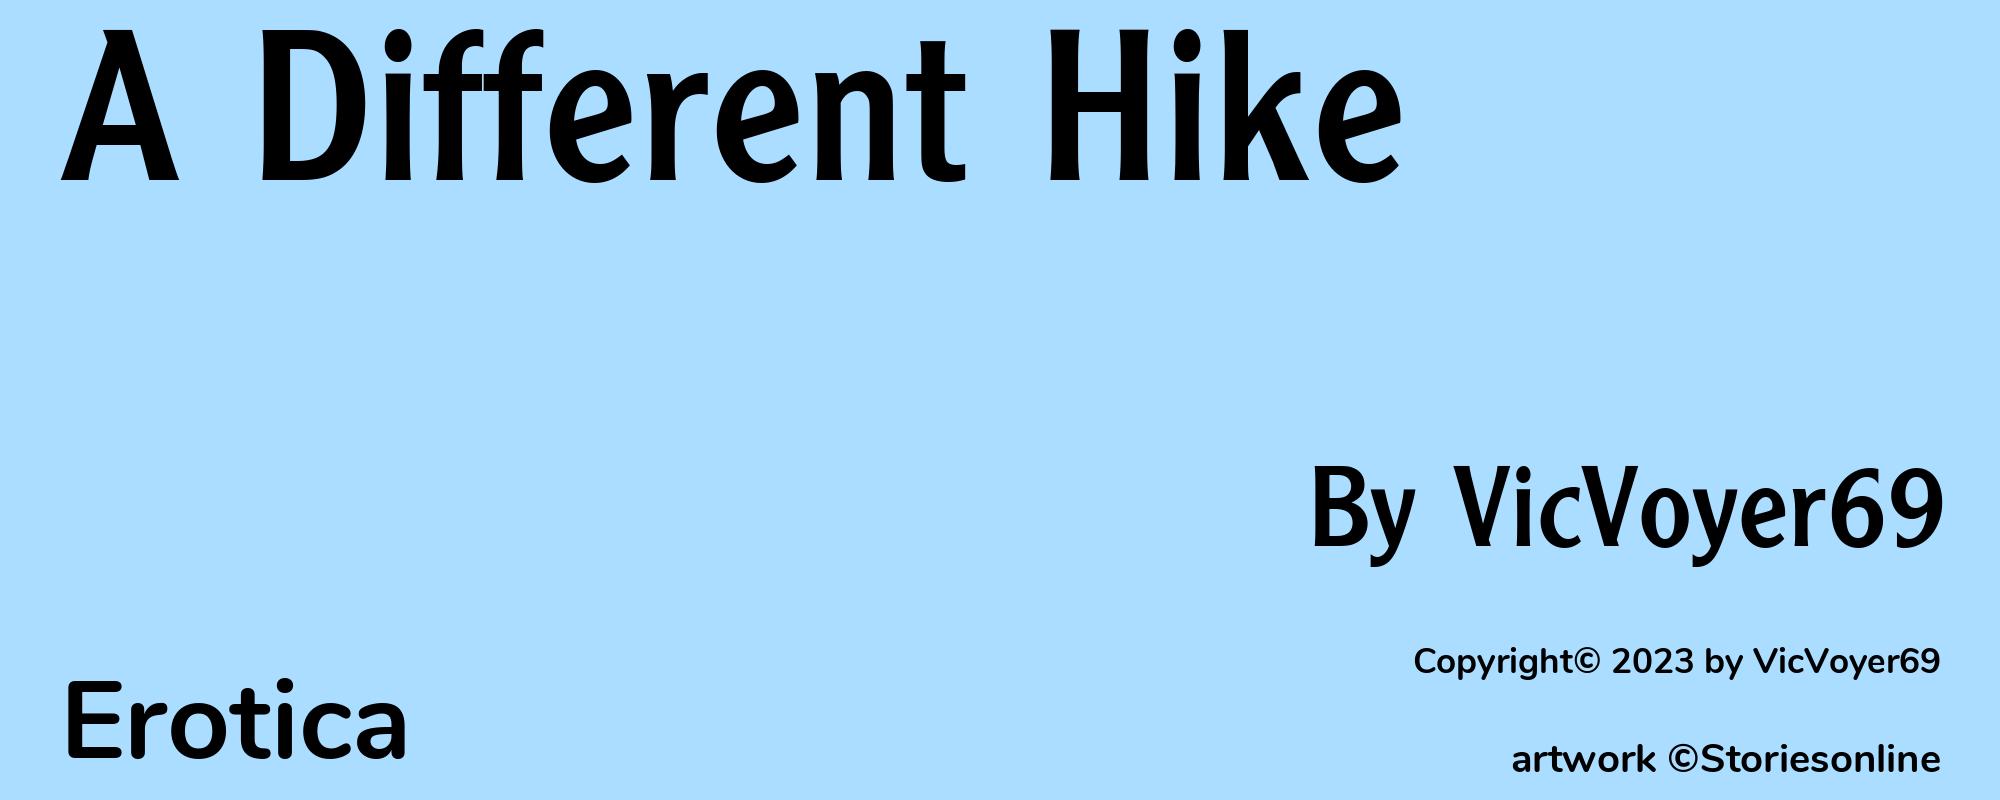 A Different Hike - Cover